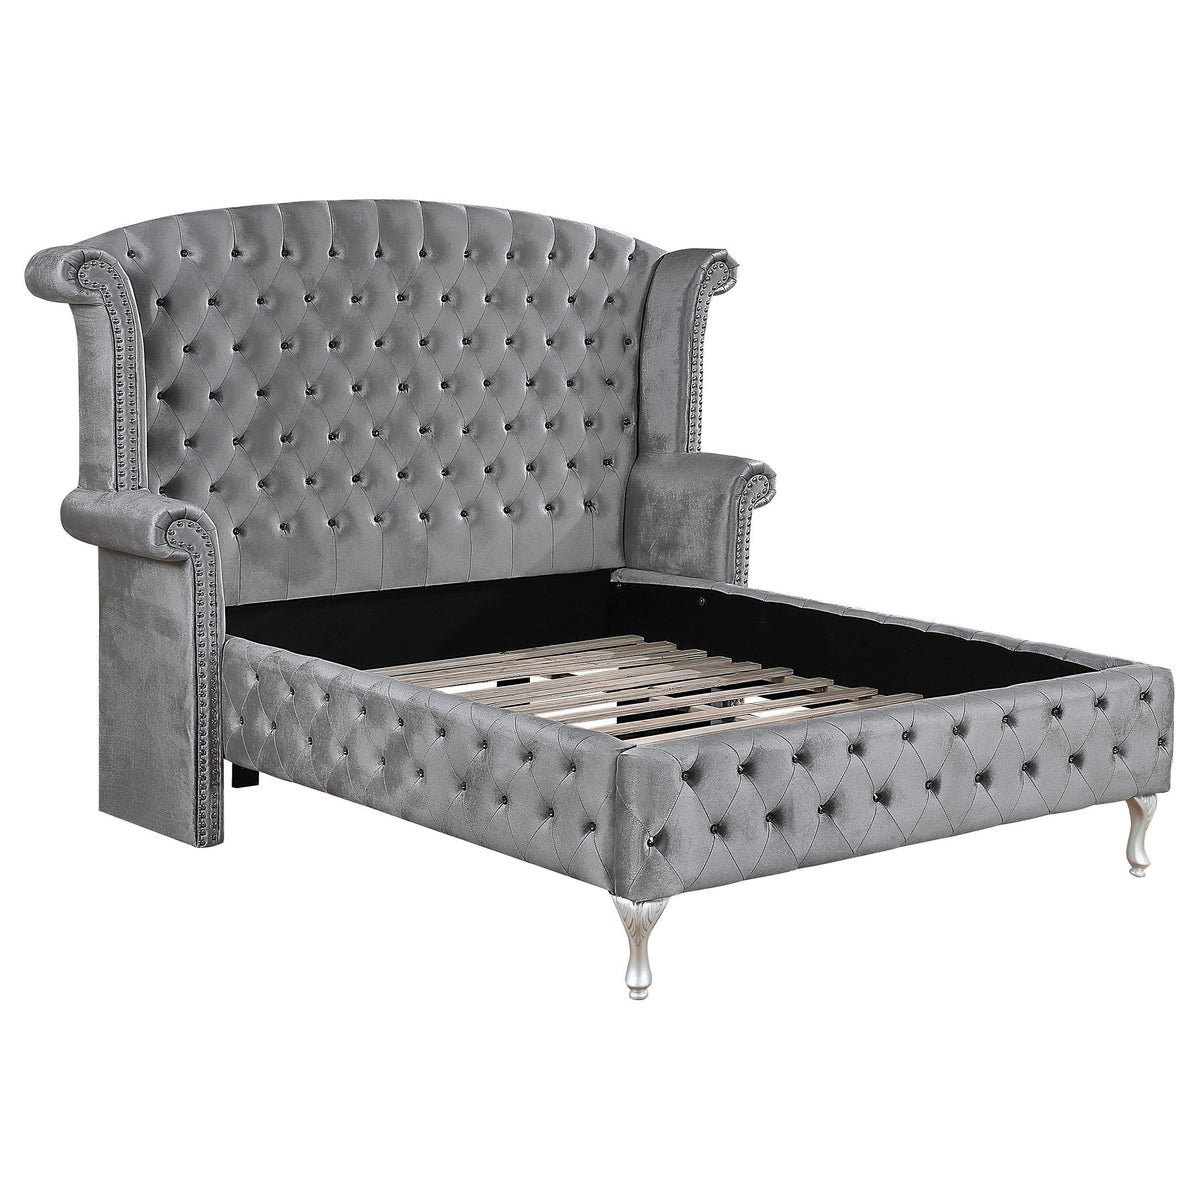 Deanna California King Tufted Upholstered Bed Grey  Half Price Furniture